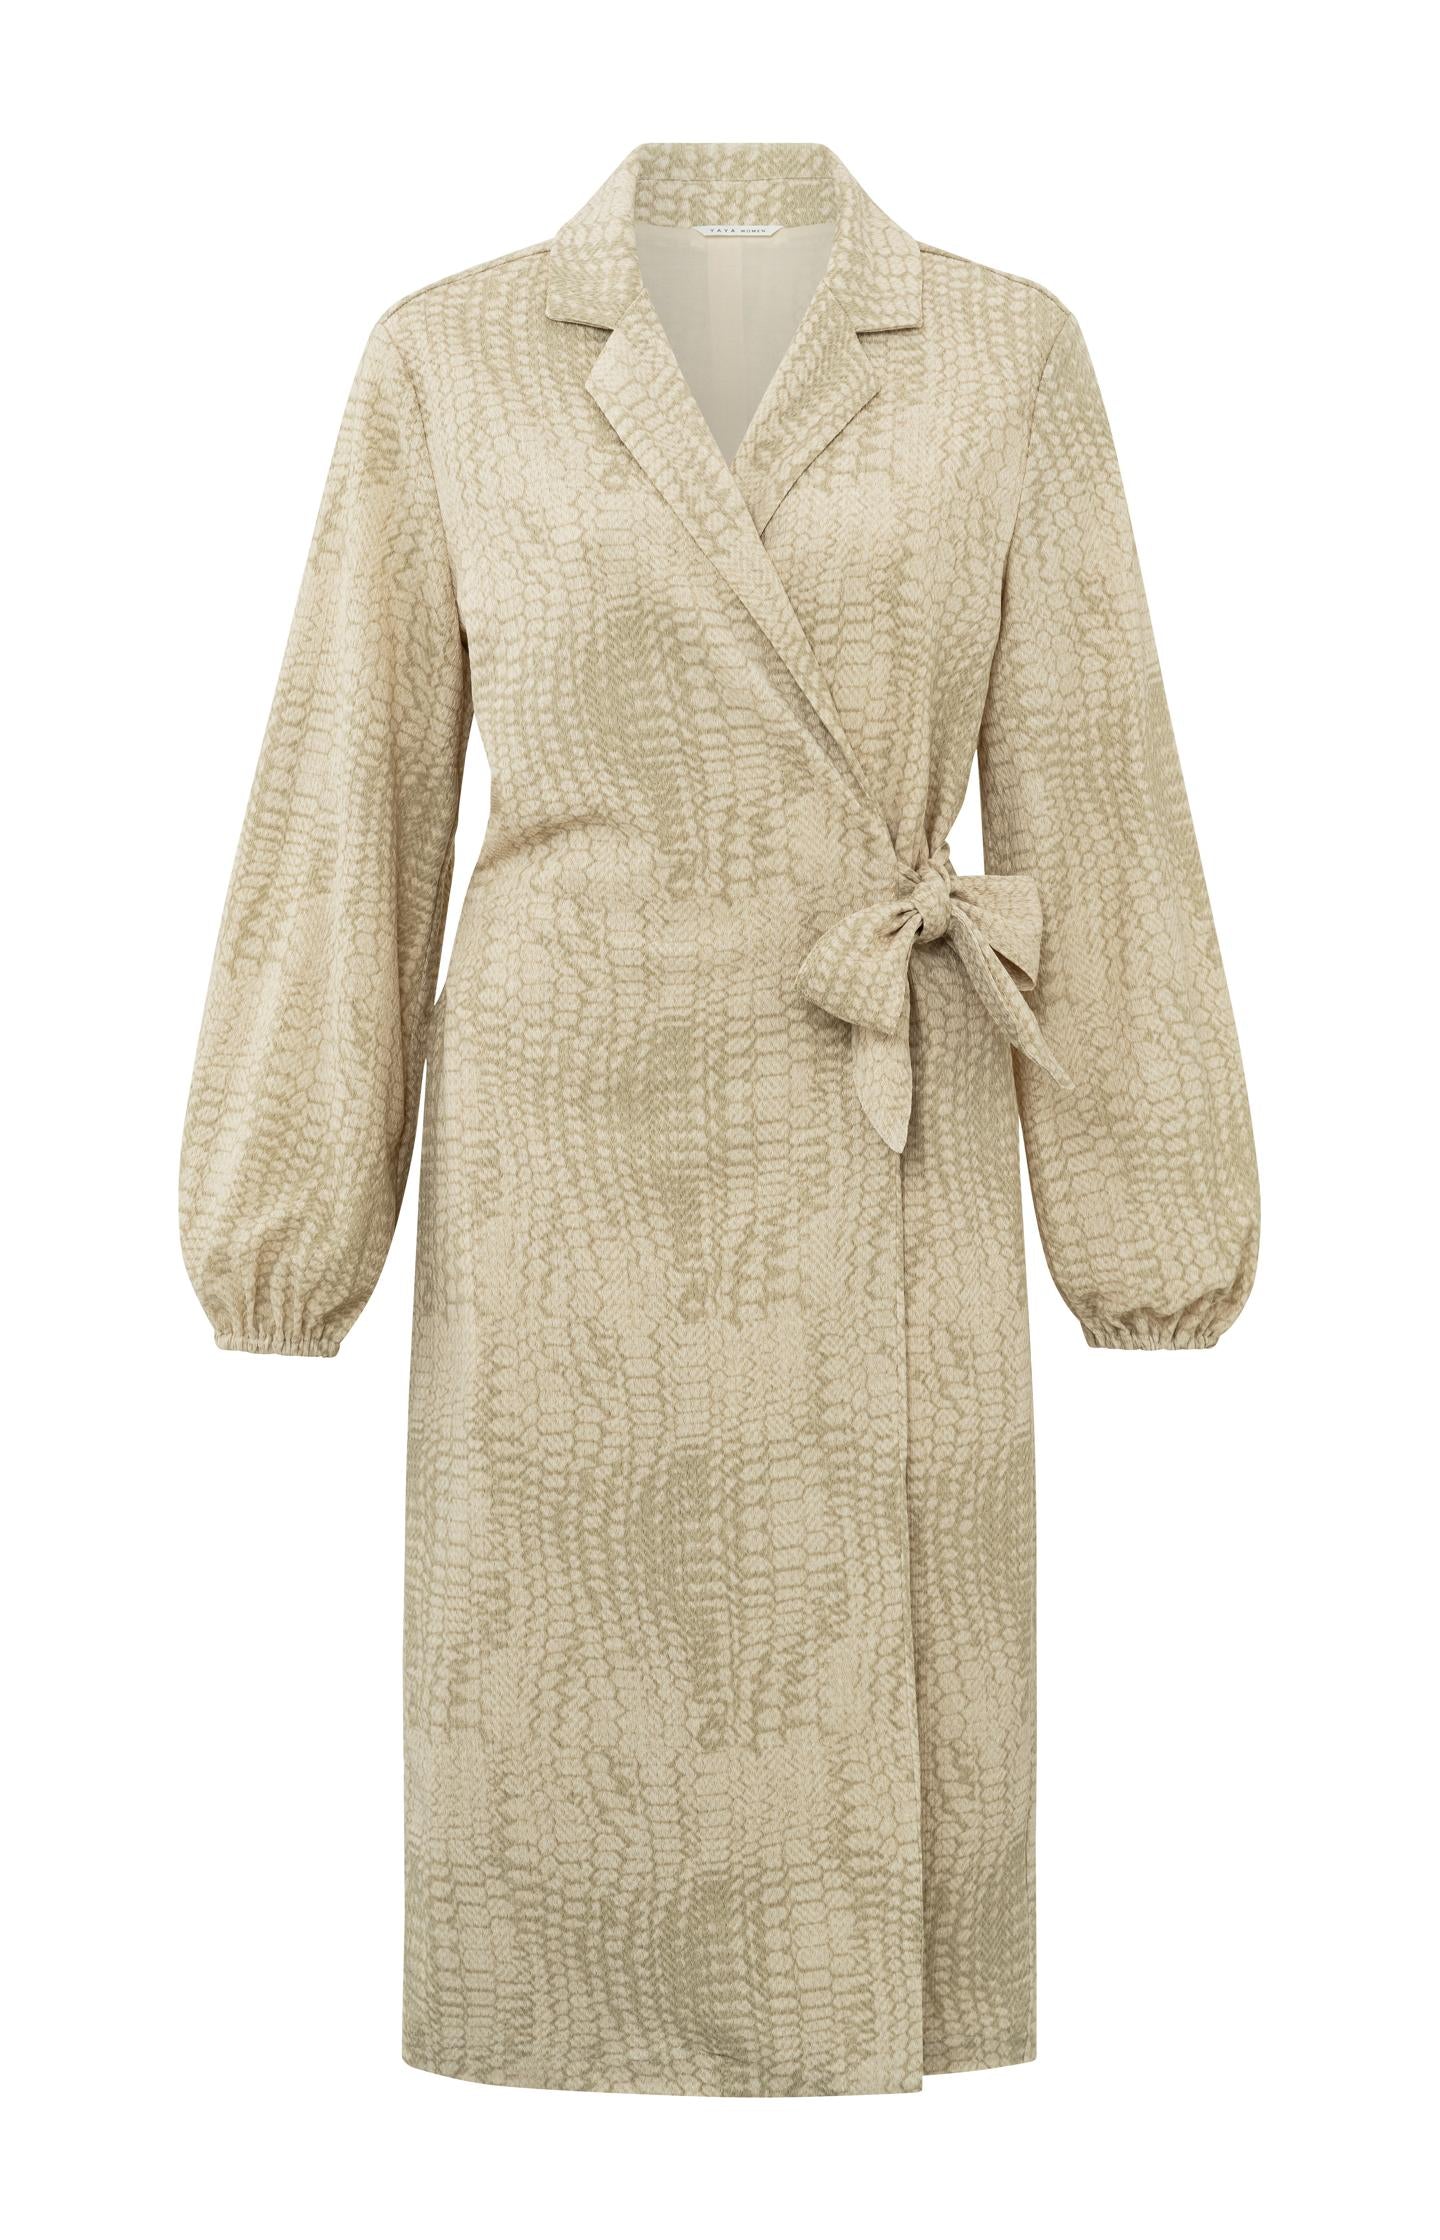 Wrap dress with V-neck, long balloon sleeves and snake print - Type: product